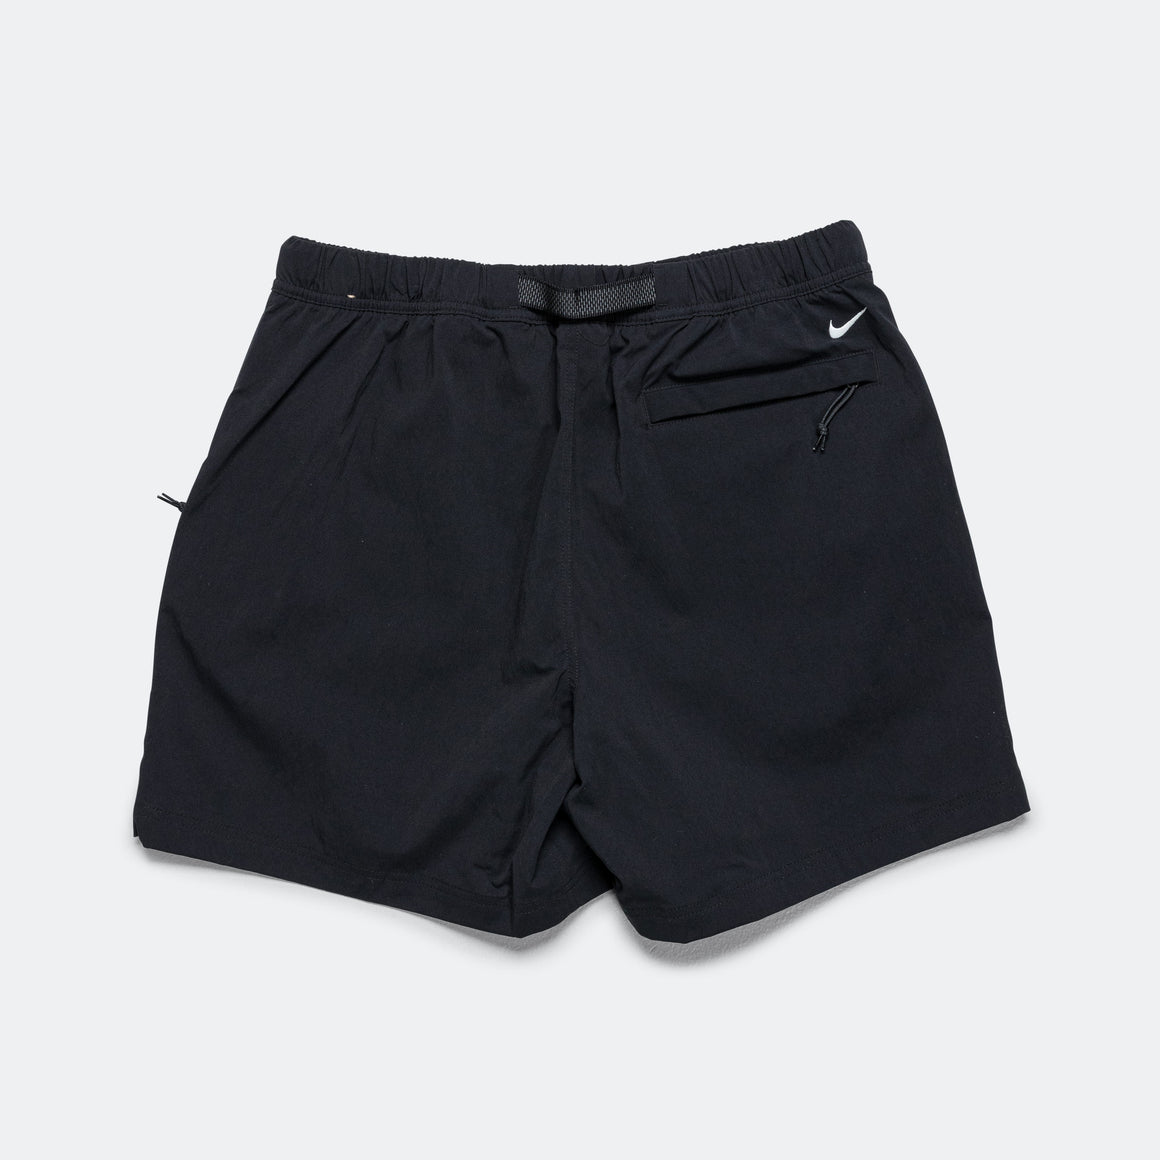 Nike ACG - Hike Short - Black/Anthracite-Summit White - UP THERE